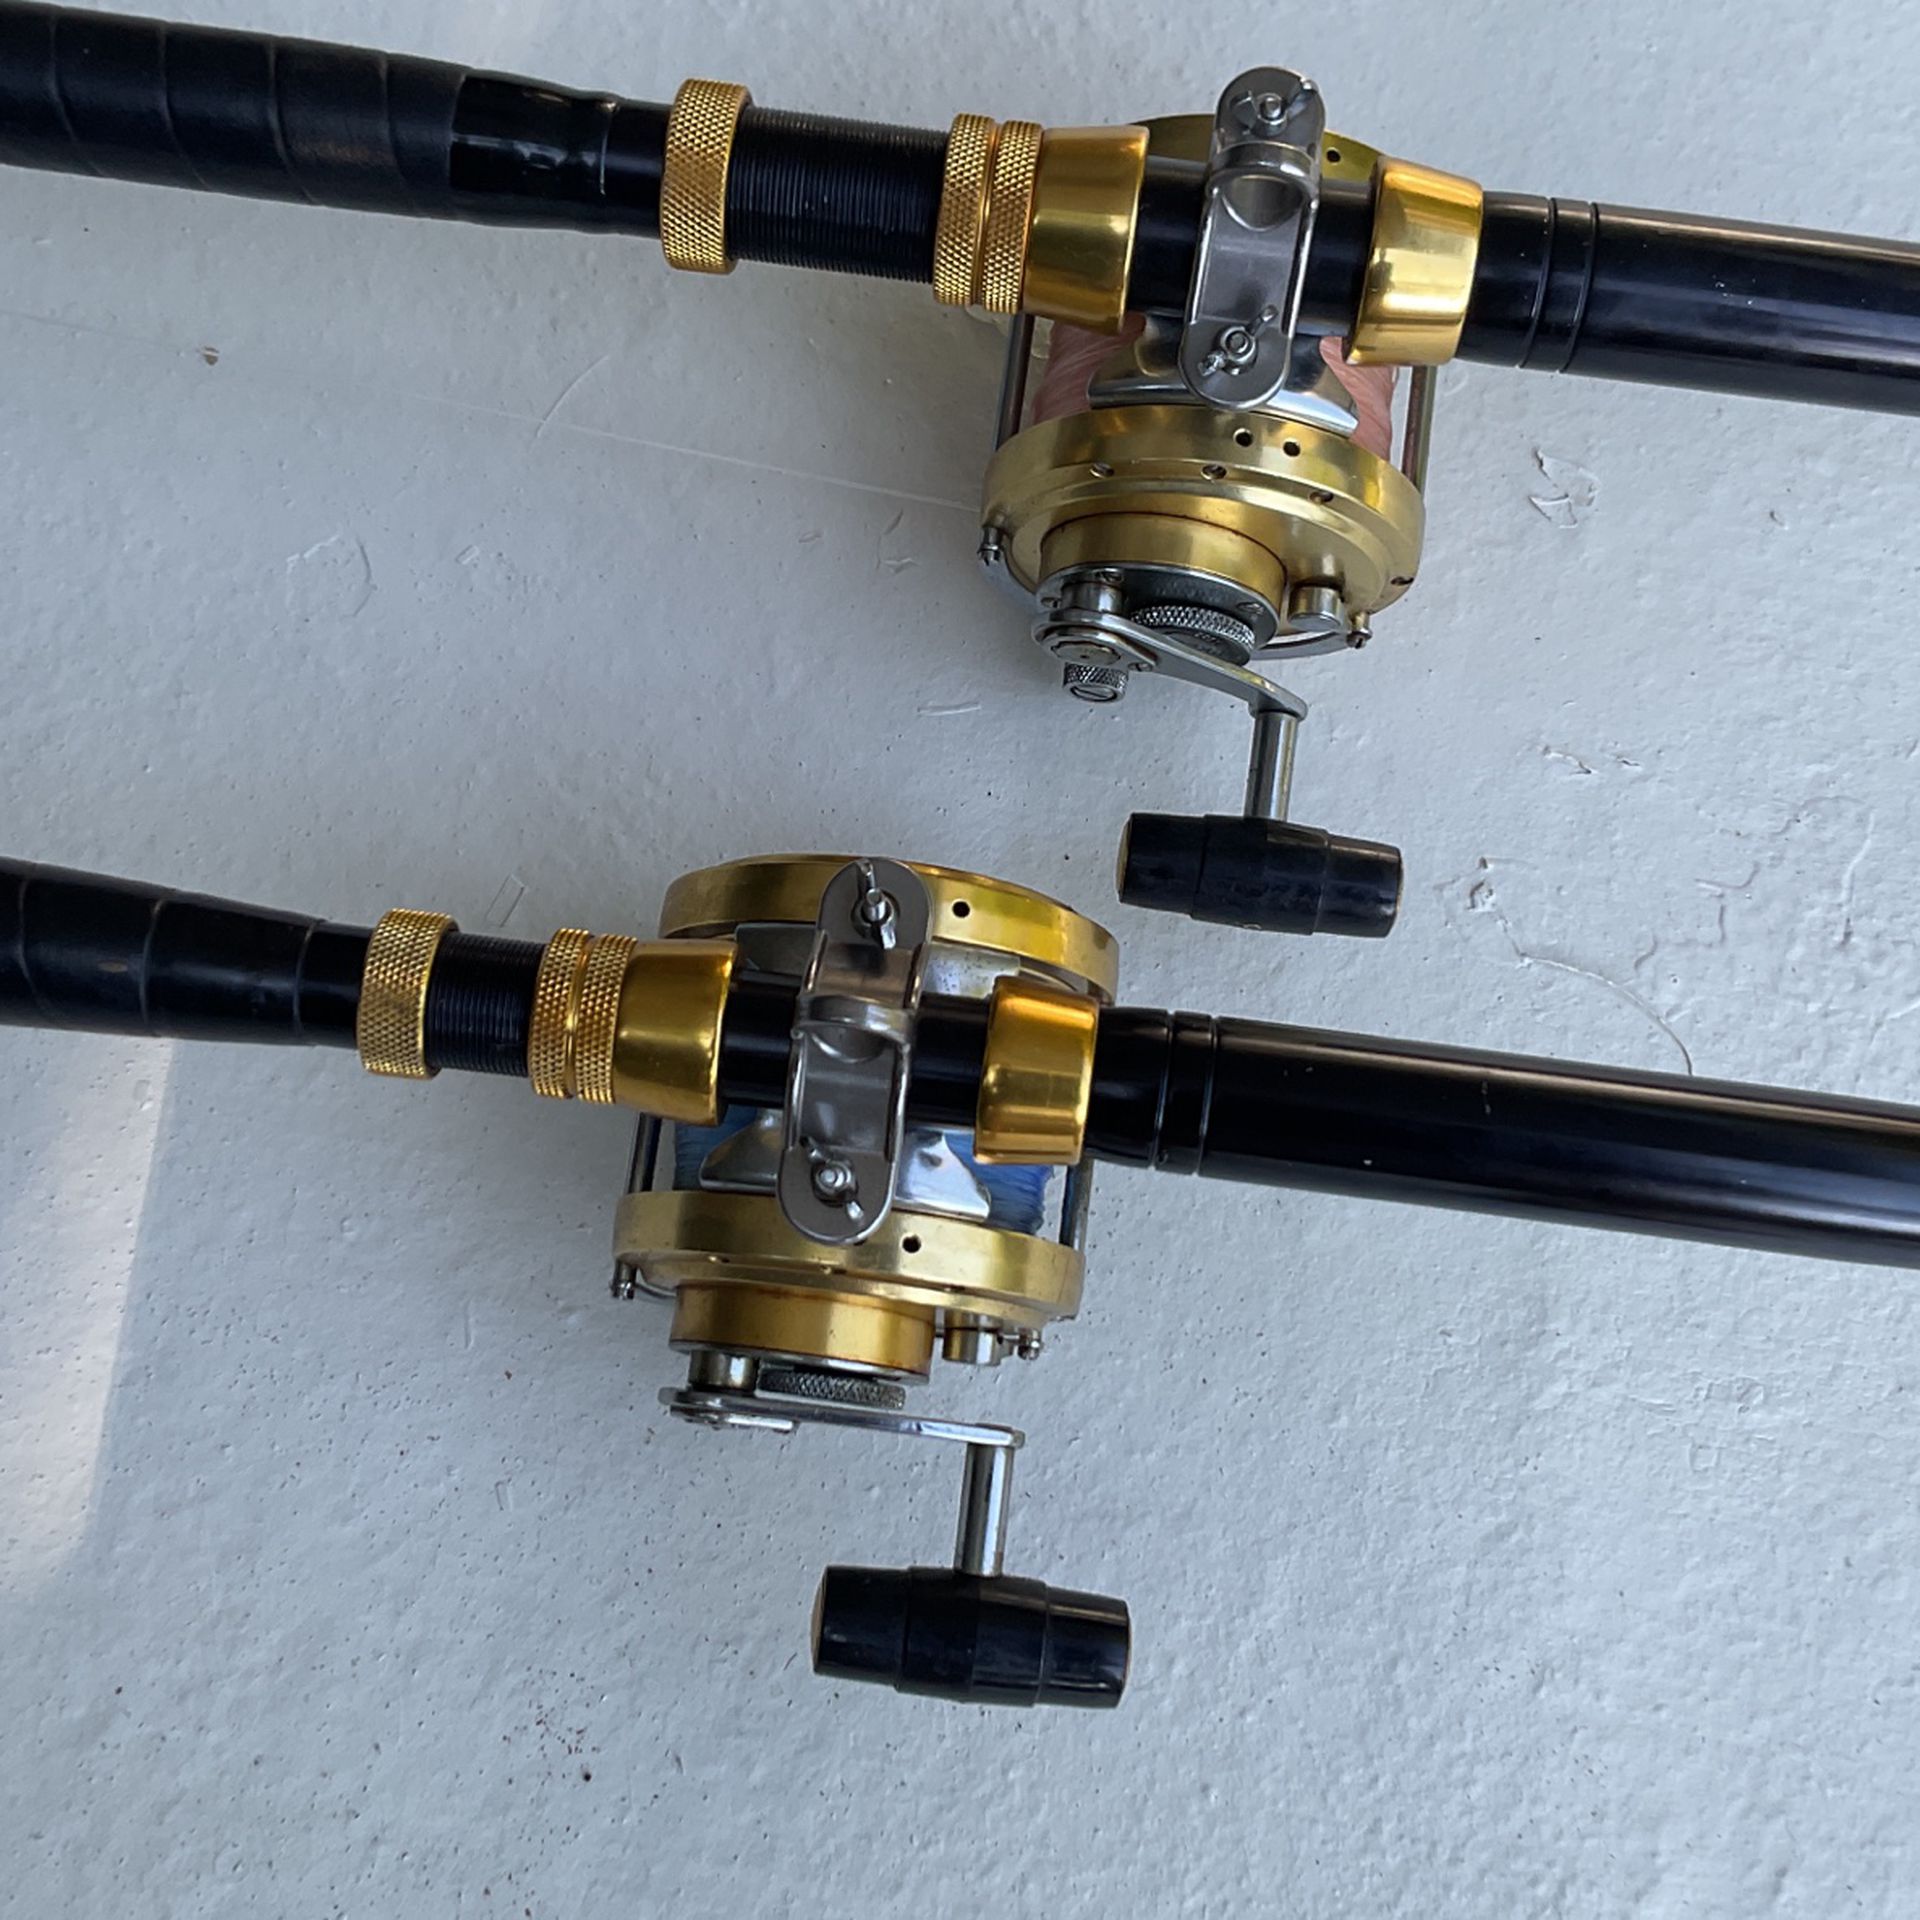 Two Penn International 50 Reels And 50lb And 80lb Class Rod And Reel Combos With line In Good Condition. Price Is for both.